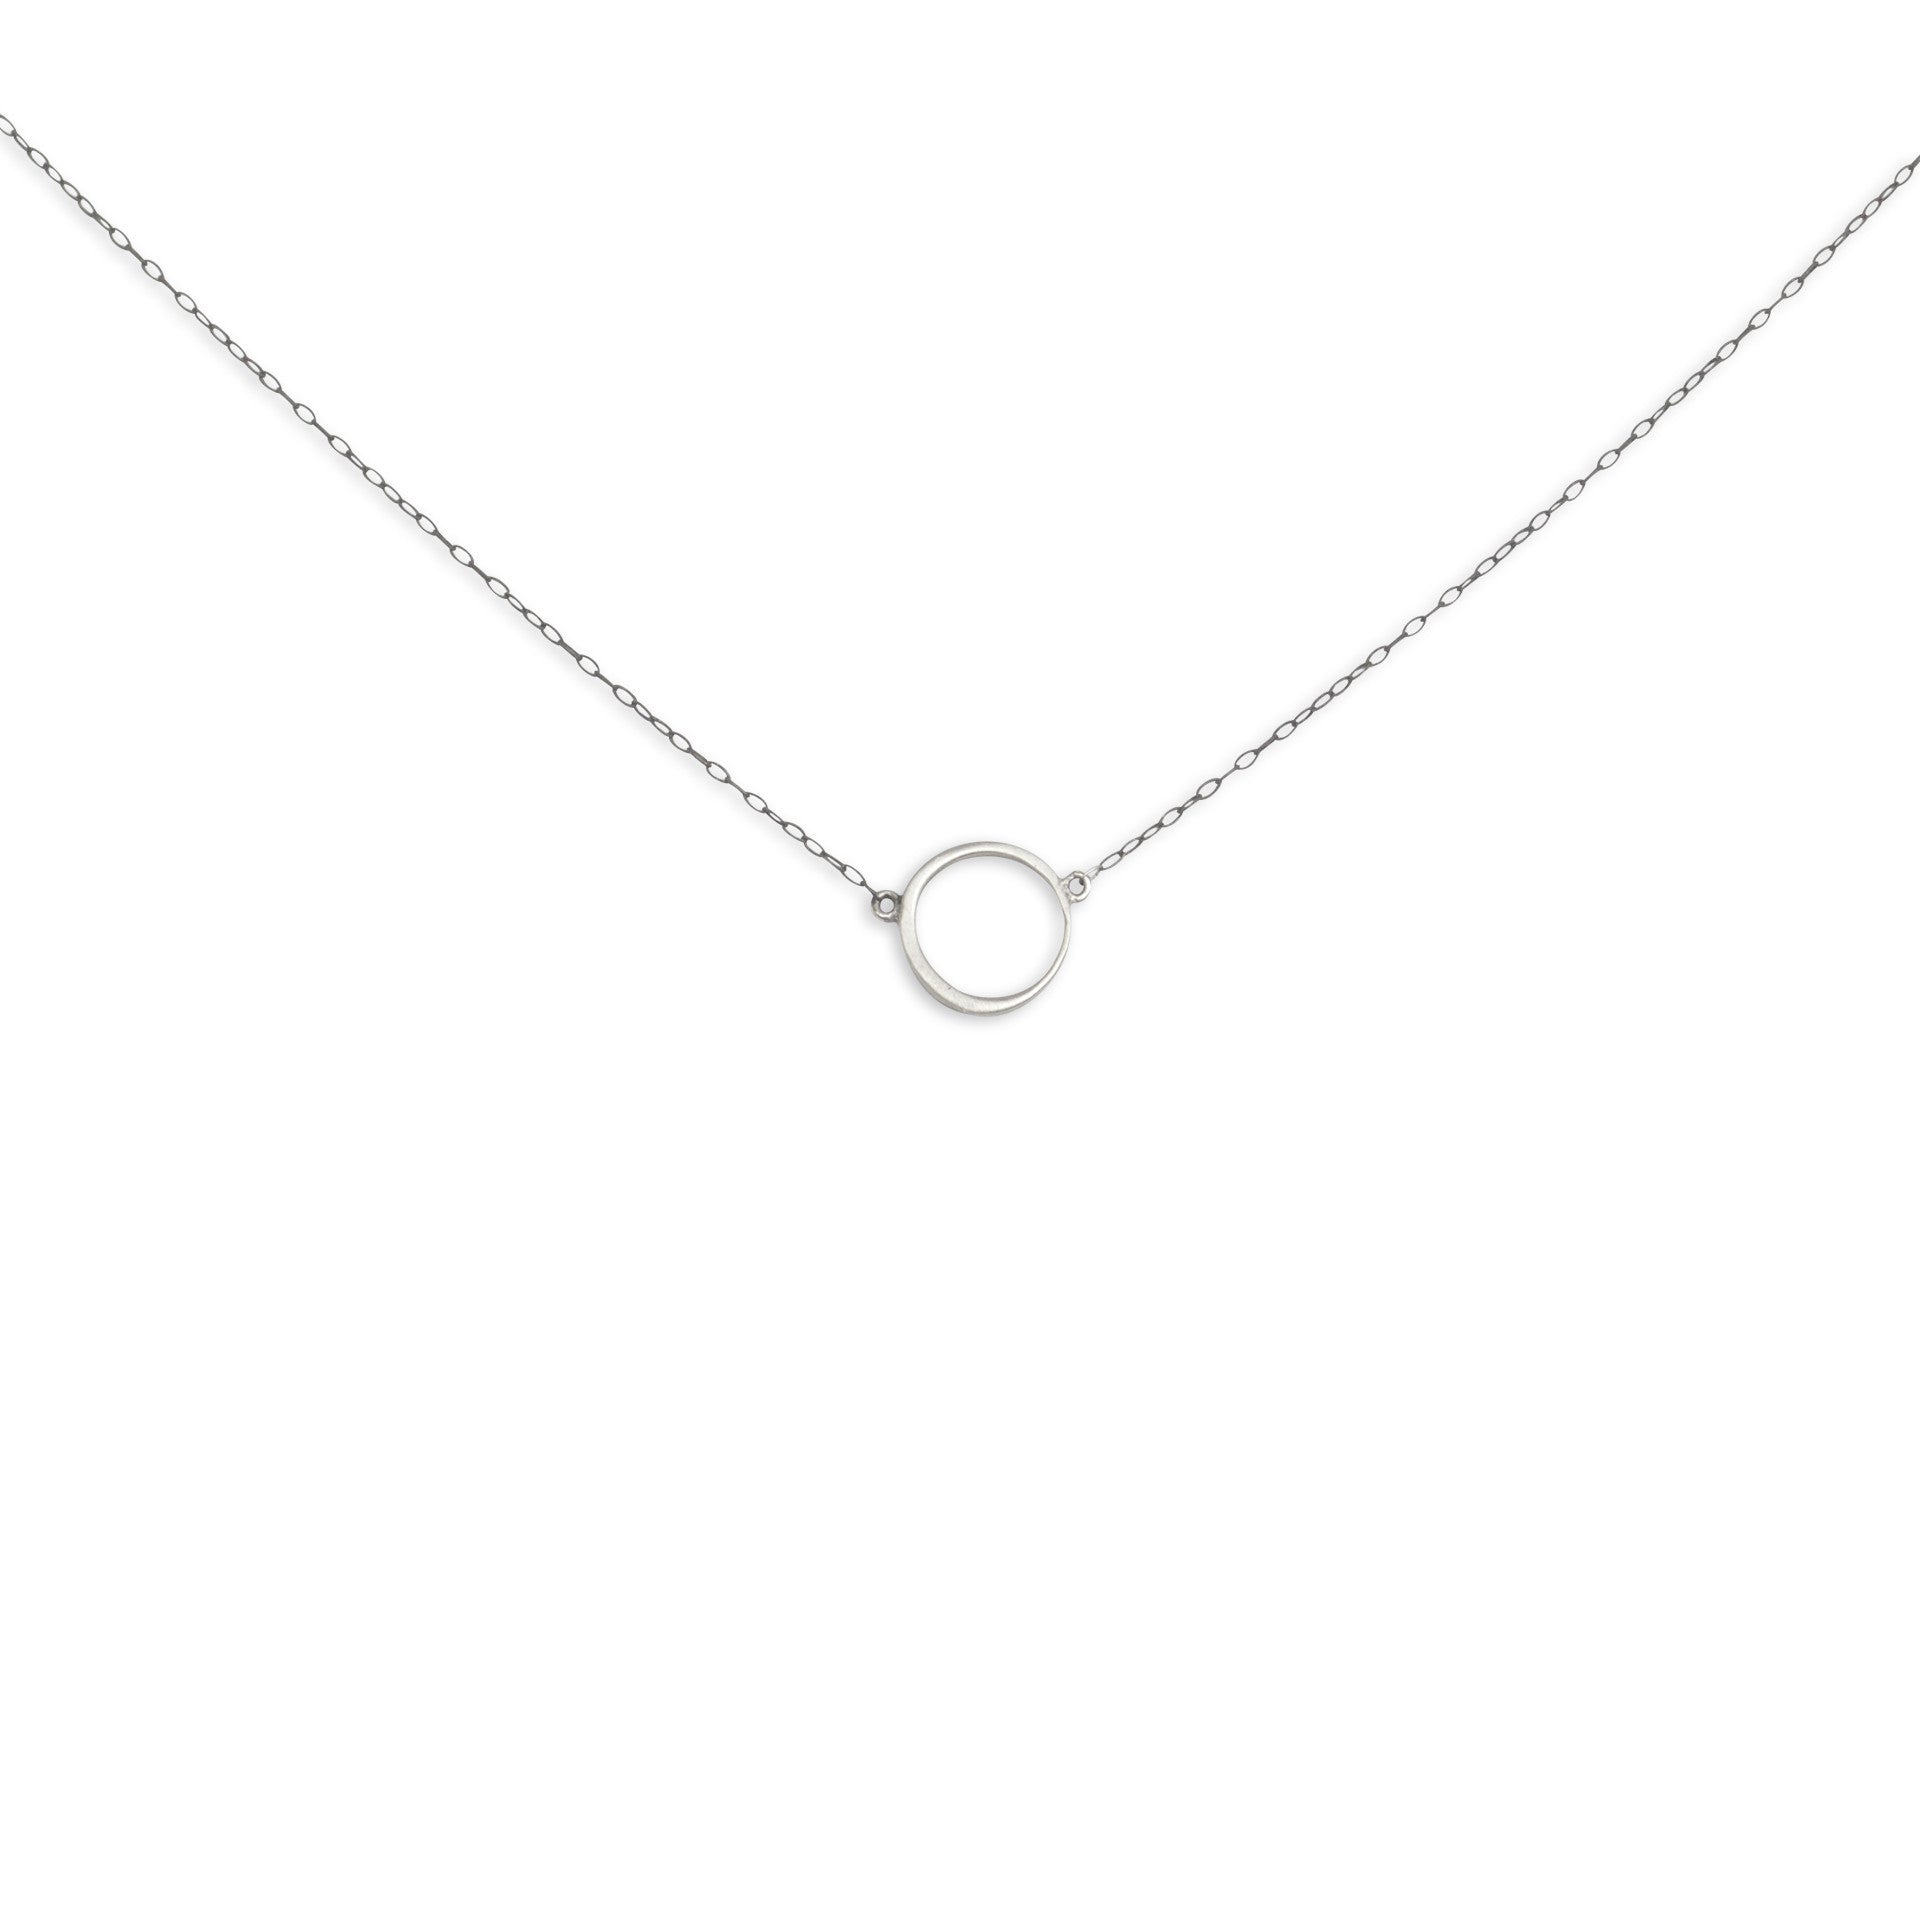 sterling silver/oxidized silver chain offset circle necklace